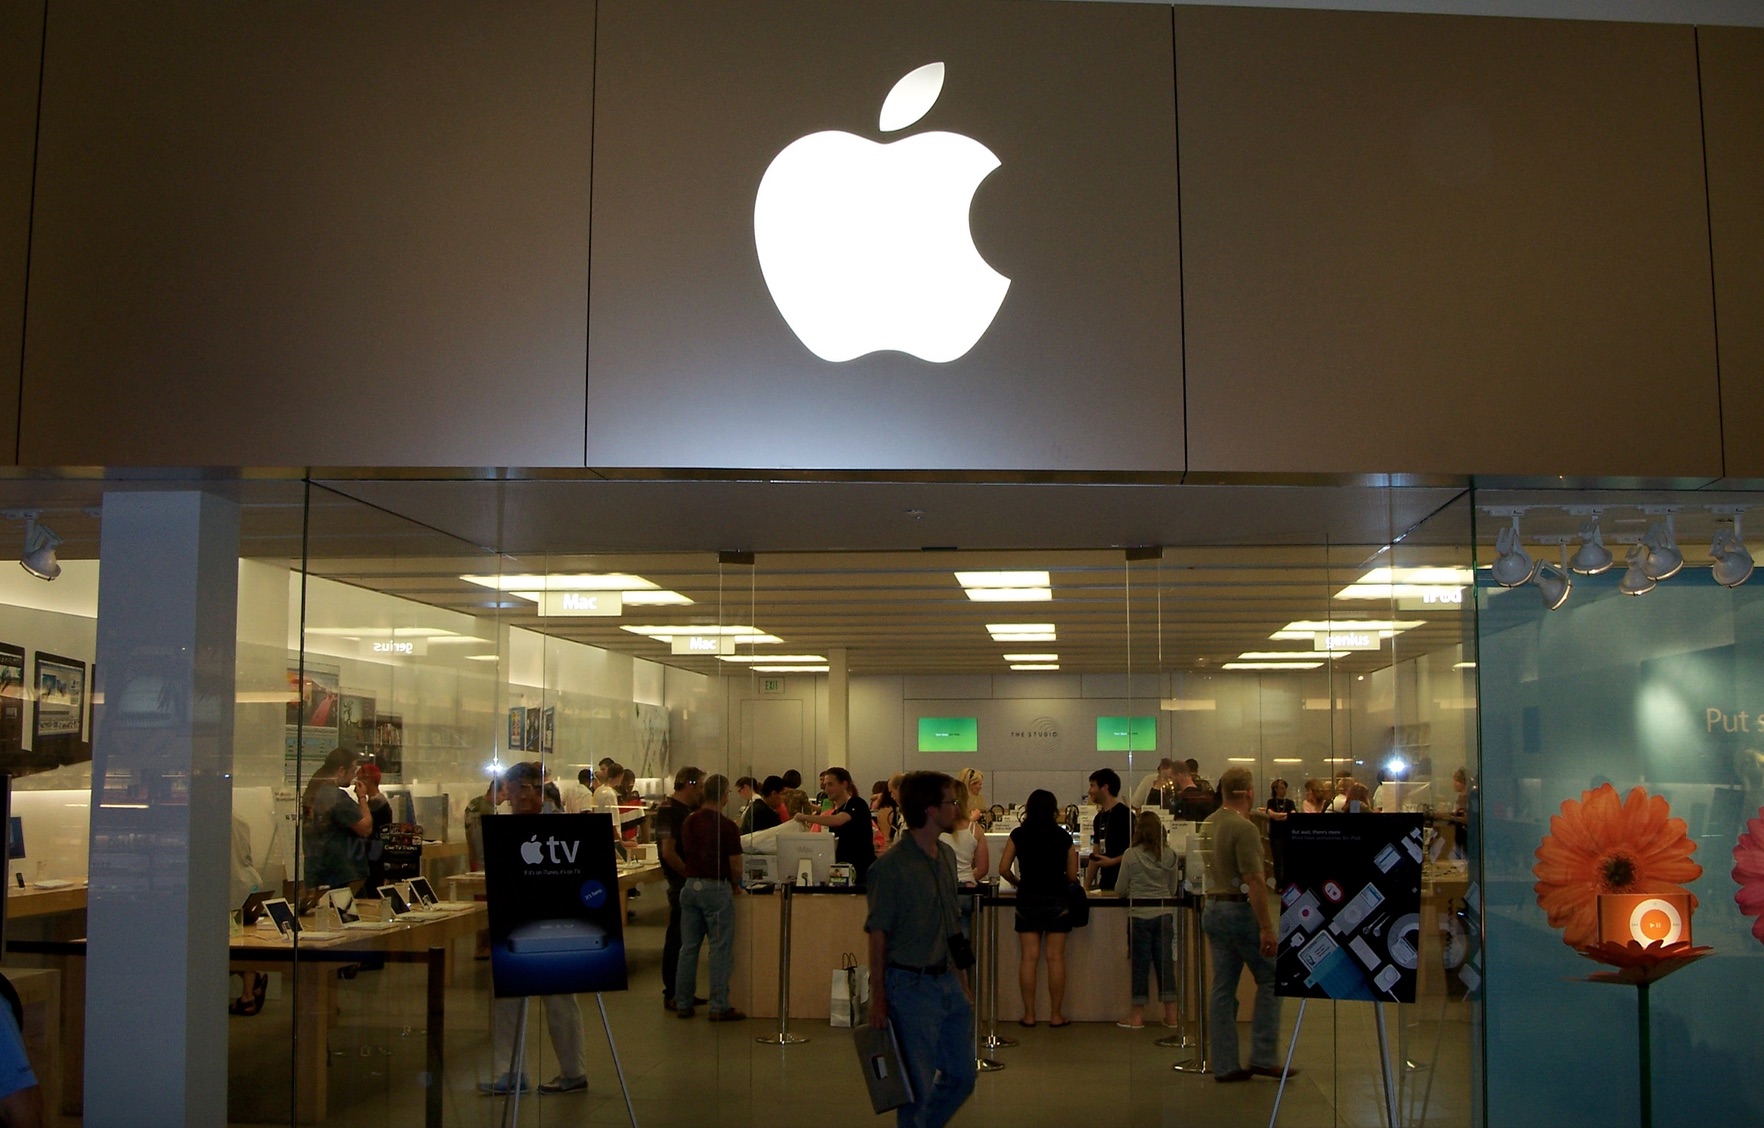 An Apple Store in Orlando, Florida. Photo by J. Jeff Kober.